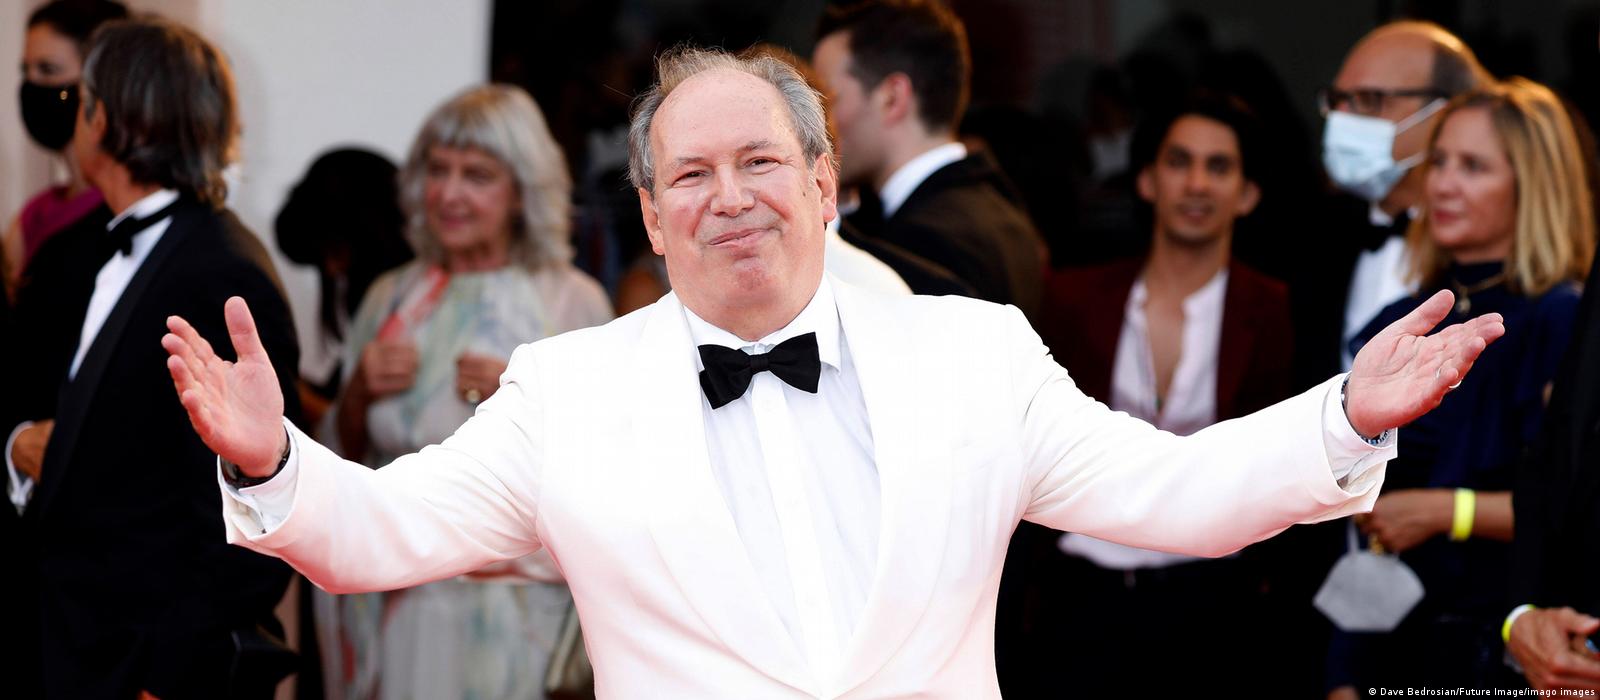 Film Composer Hans Zimmer's Net Worth Reflects 4 Decades in Hollywood! See  His Fortune